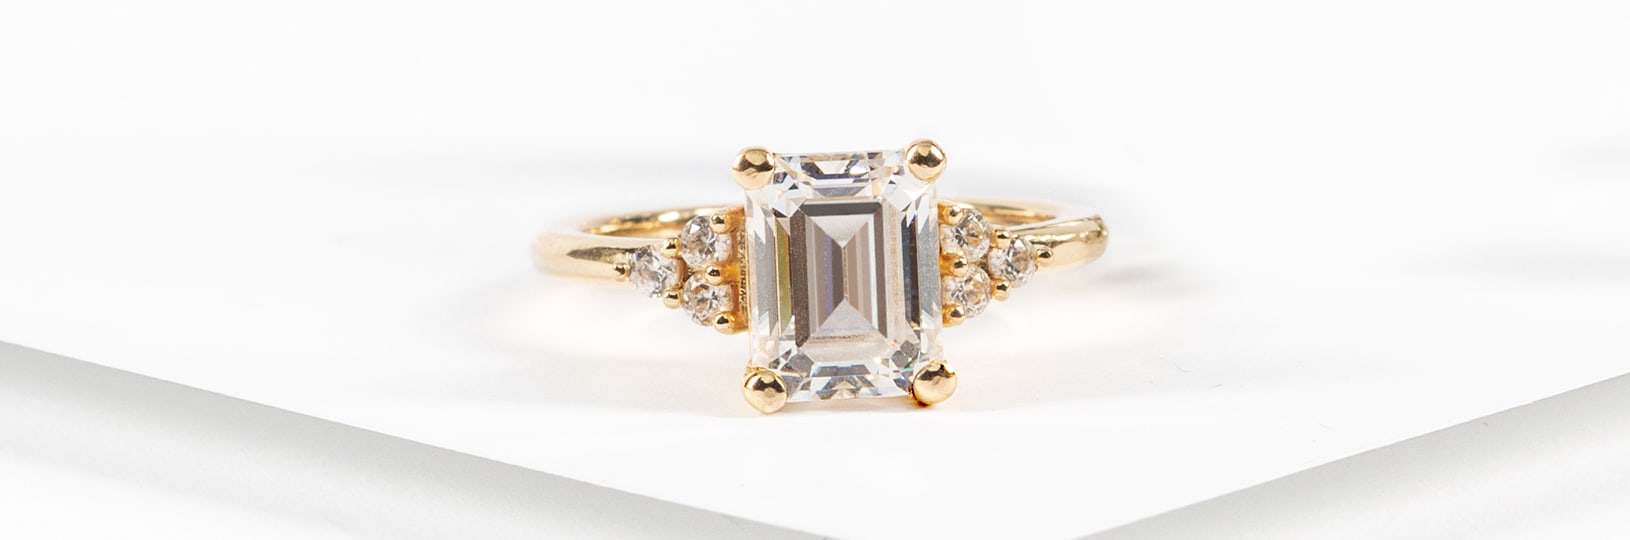 An emerald cut engagement ring in a three stone setting